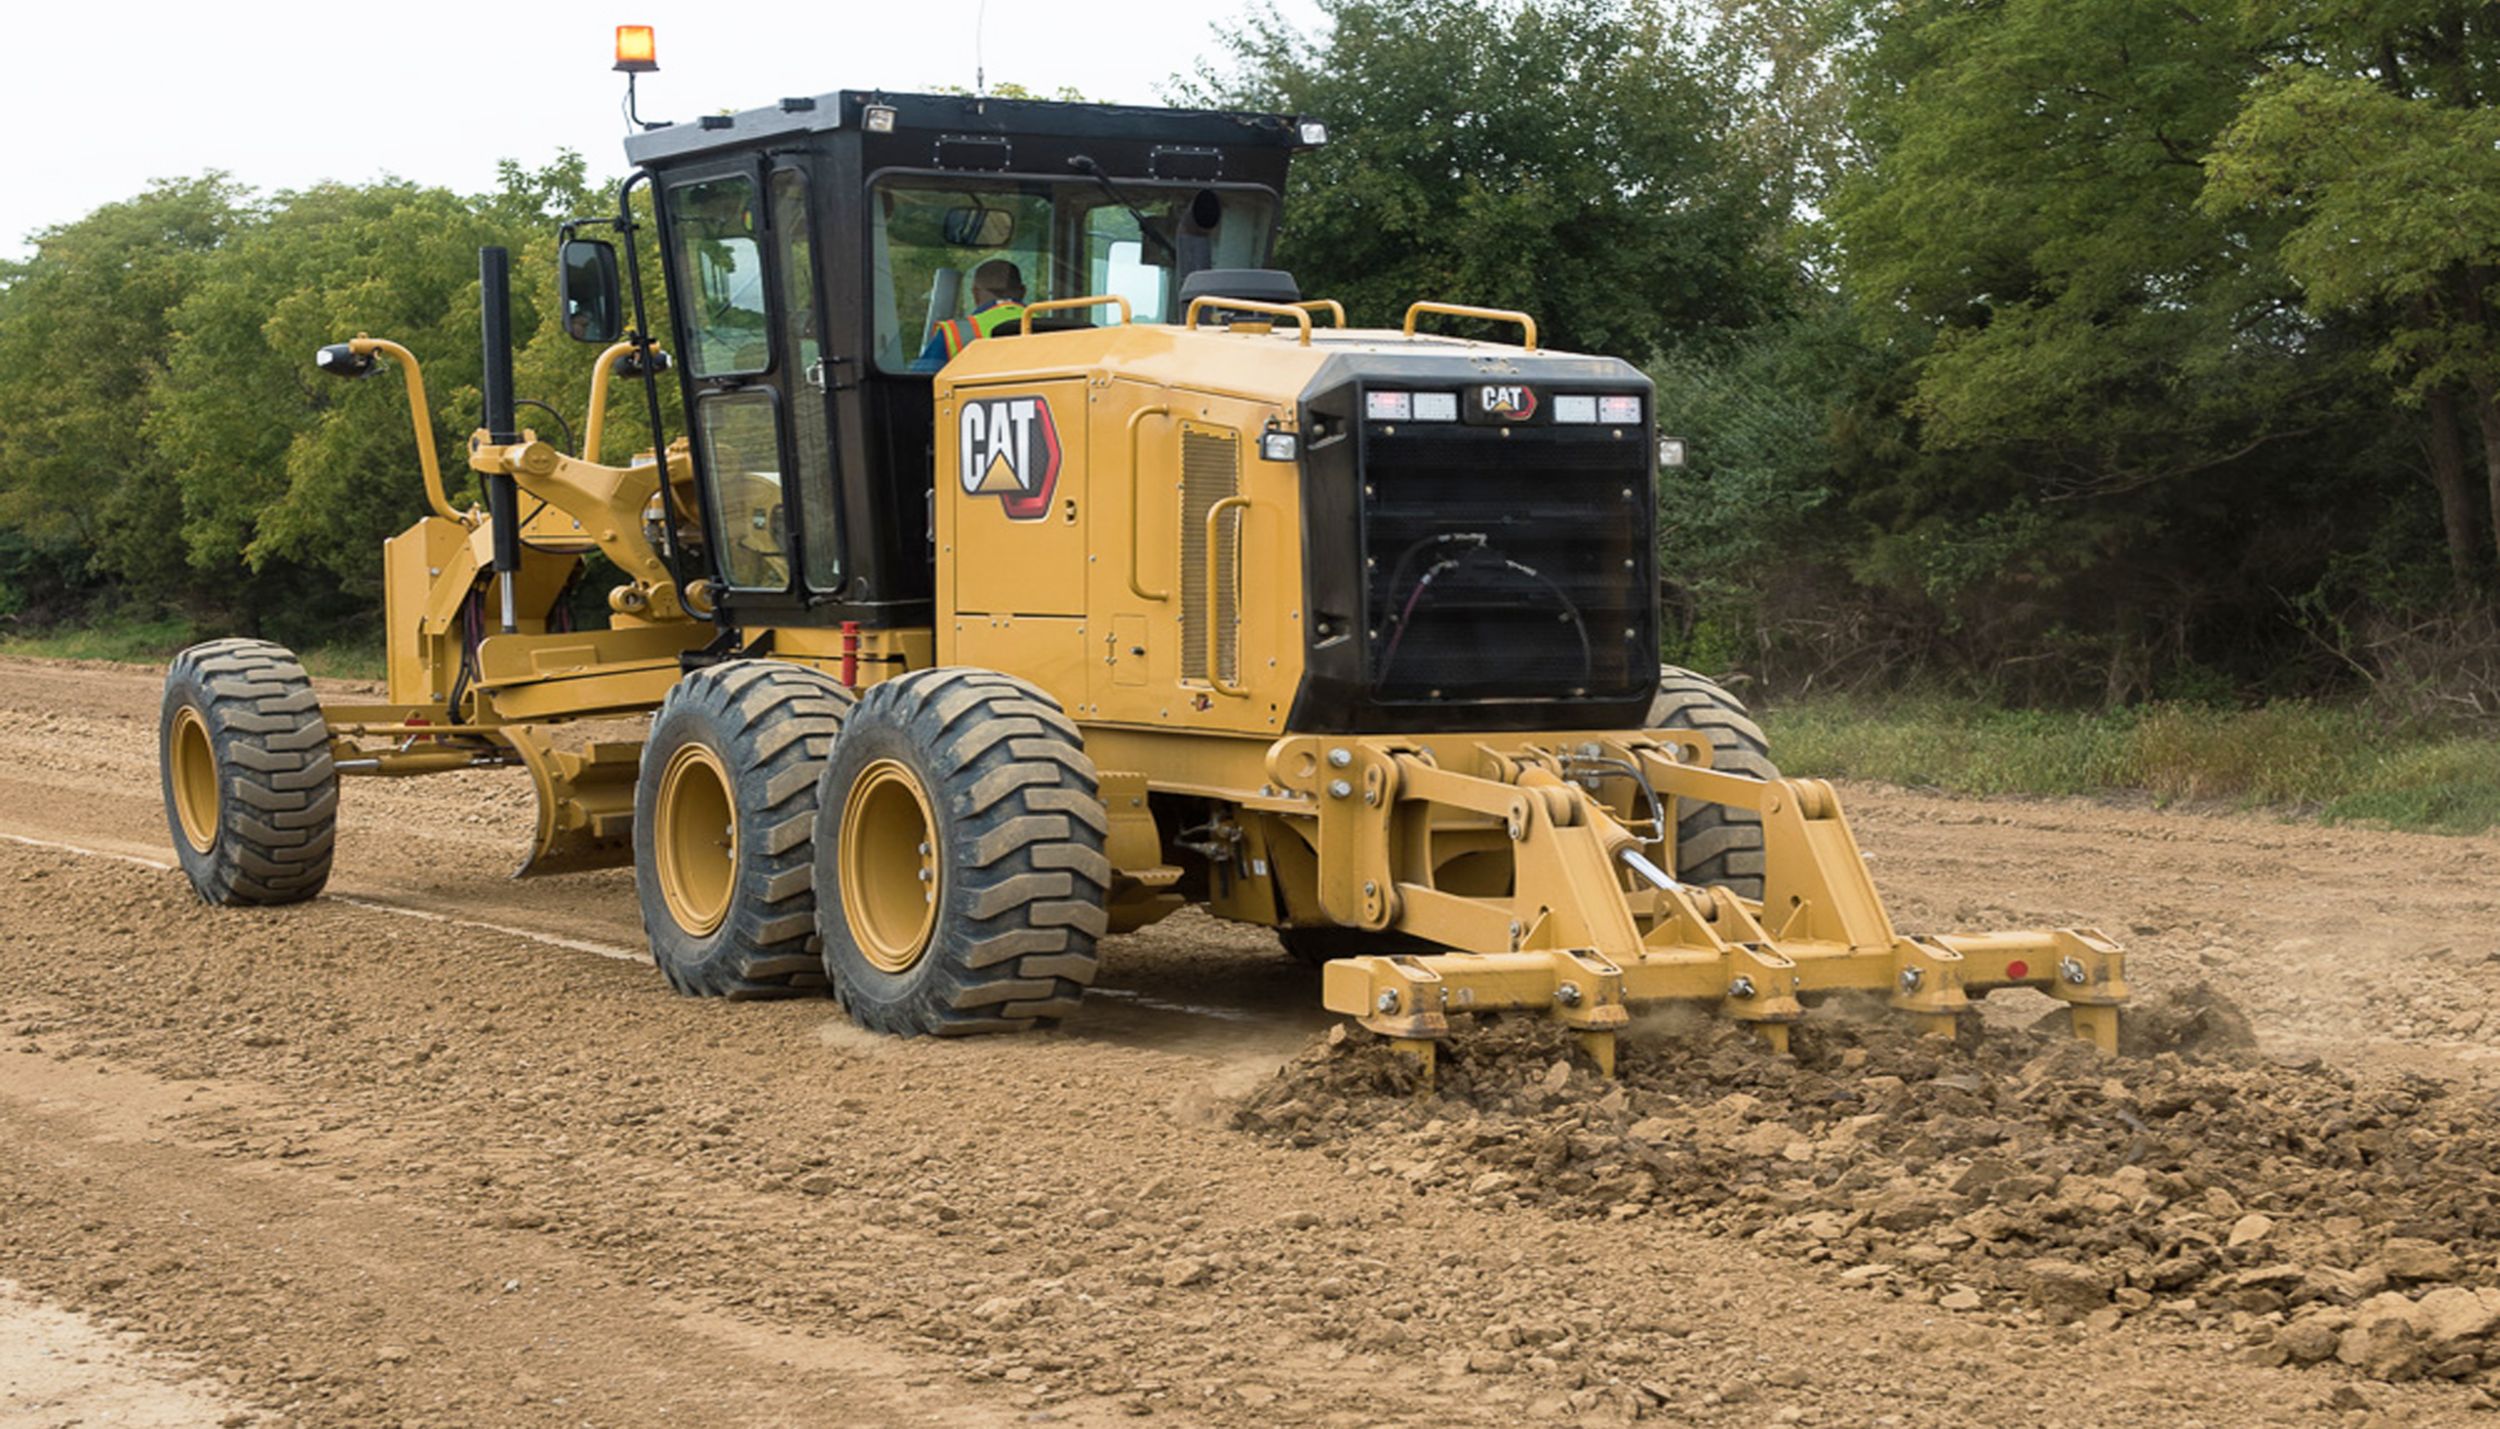 Cat 140 GC Motor Grader - EXPAND YOUR CAPABILITIES